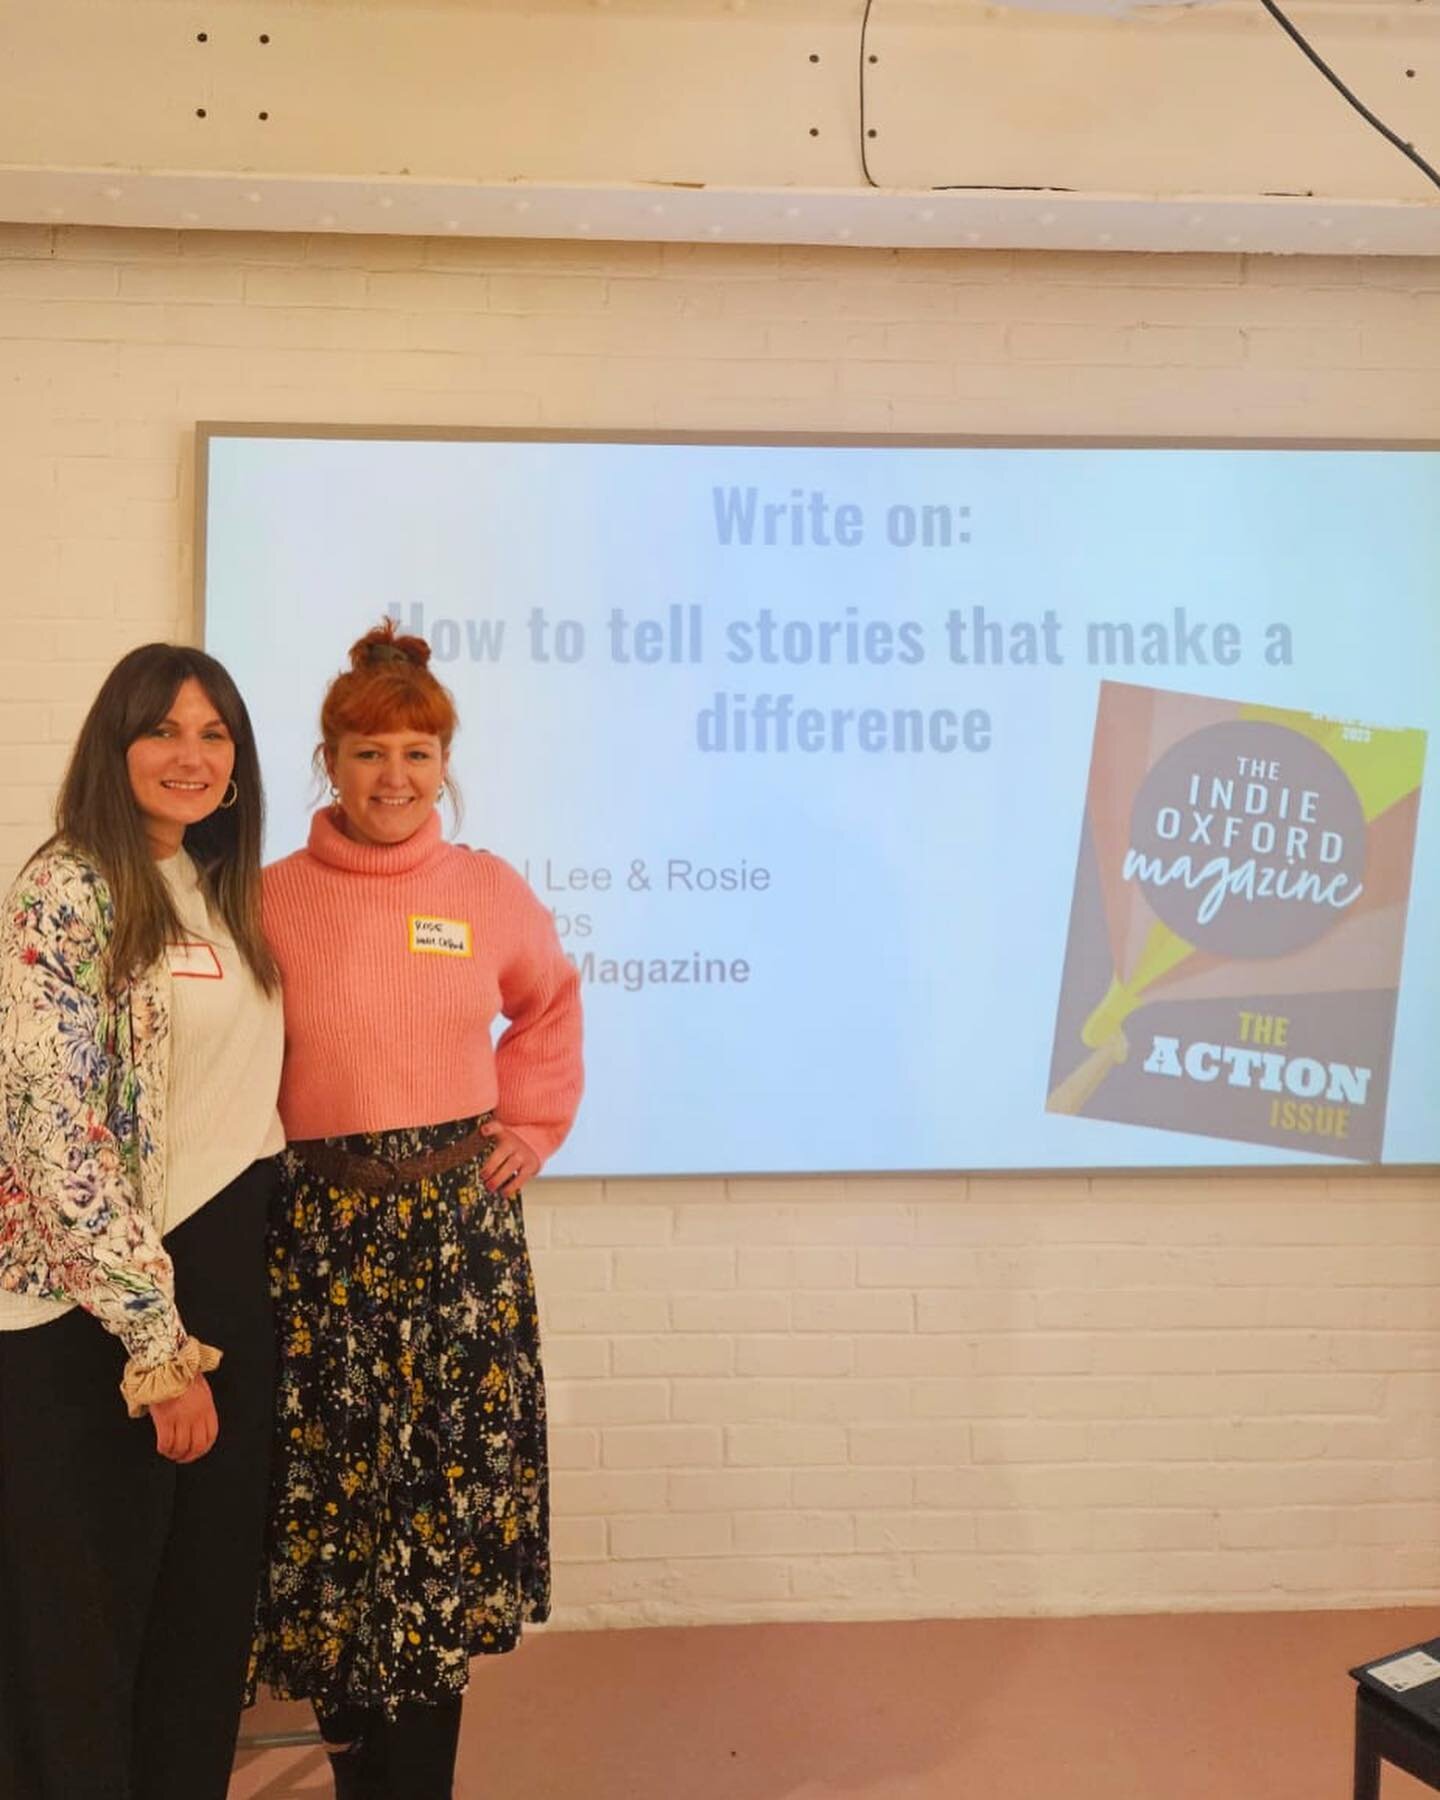 Me and @arosielifeuk hosted a writing workshop today as part of Marmalade festival - a really cool local festival all about social change / justice 🍊 at @mao_gallery one of my fave spaces in Oxford. 

The workshop was all about creating stories that